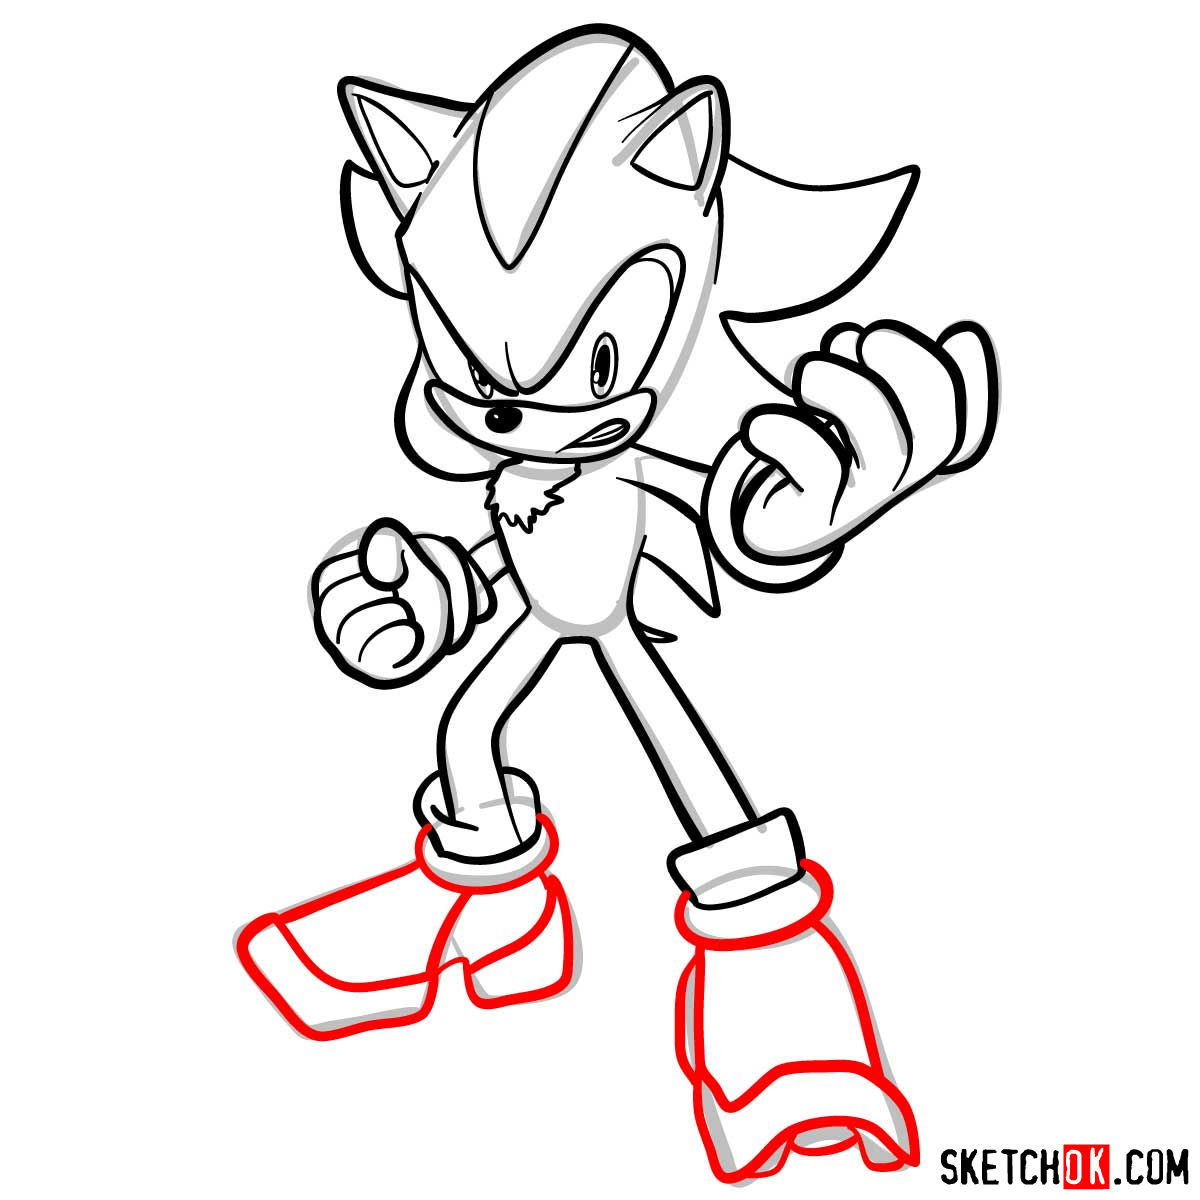 How to draw angry Shadow the Hedgehog - step 11